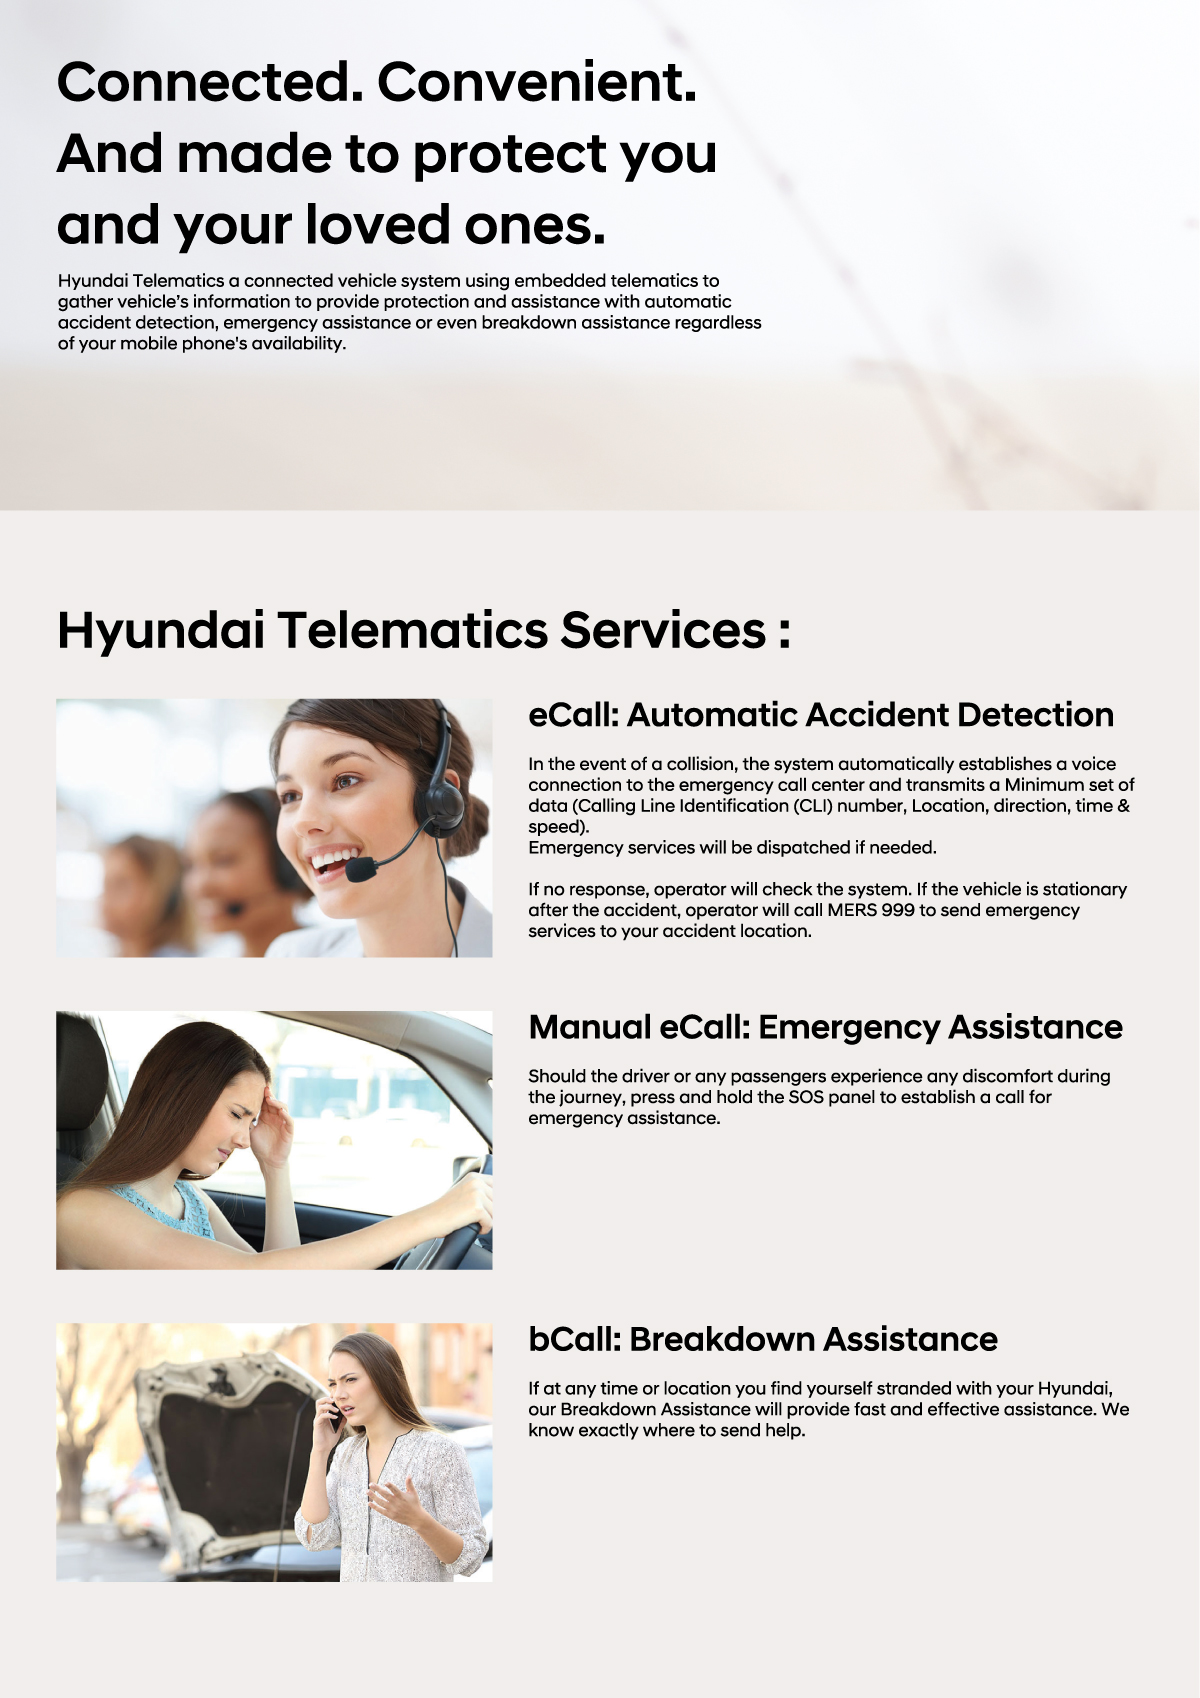 02 - Hyundai Telematics - 24/7 protection and assistance. eCall - automatic Accident Detection | Manual eCall : Emergency Assistance | bCall : Breakdown Assistance. | Service Assist | Mobile App - Connected Security Features | Stolen Vehicle Tracking